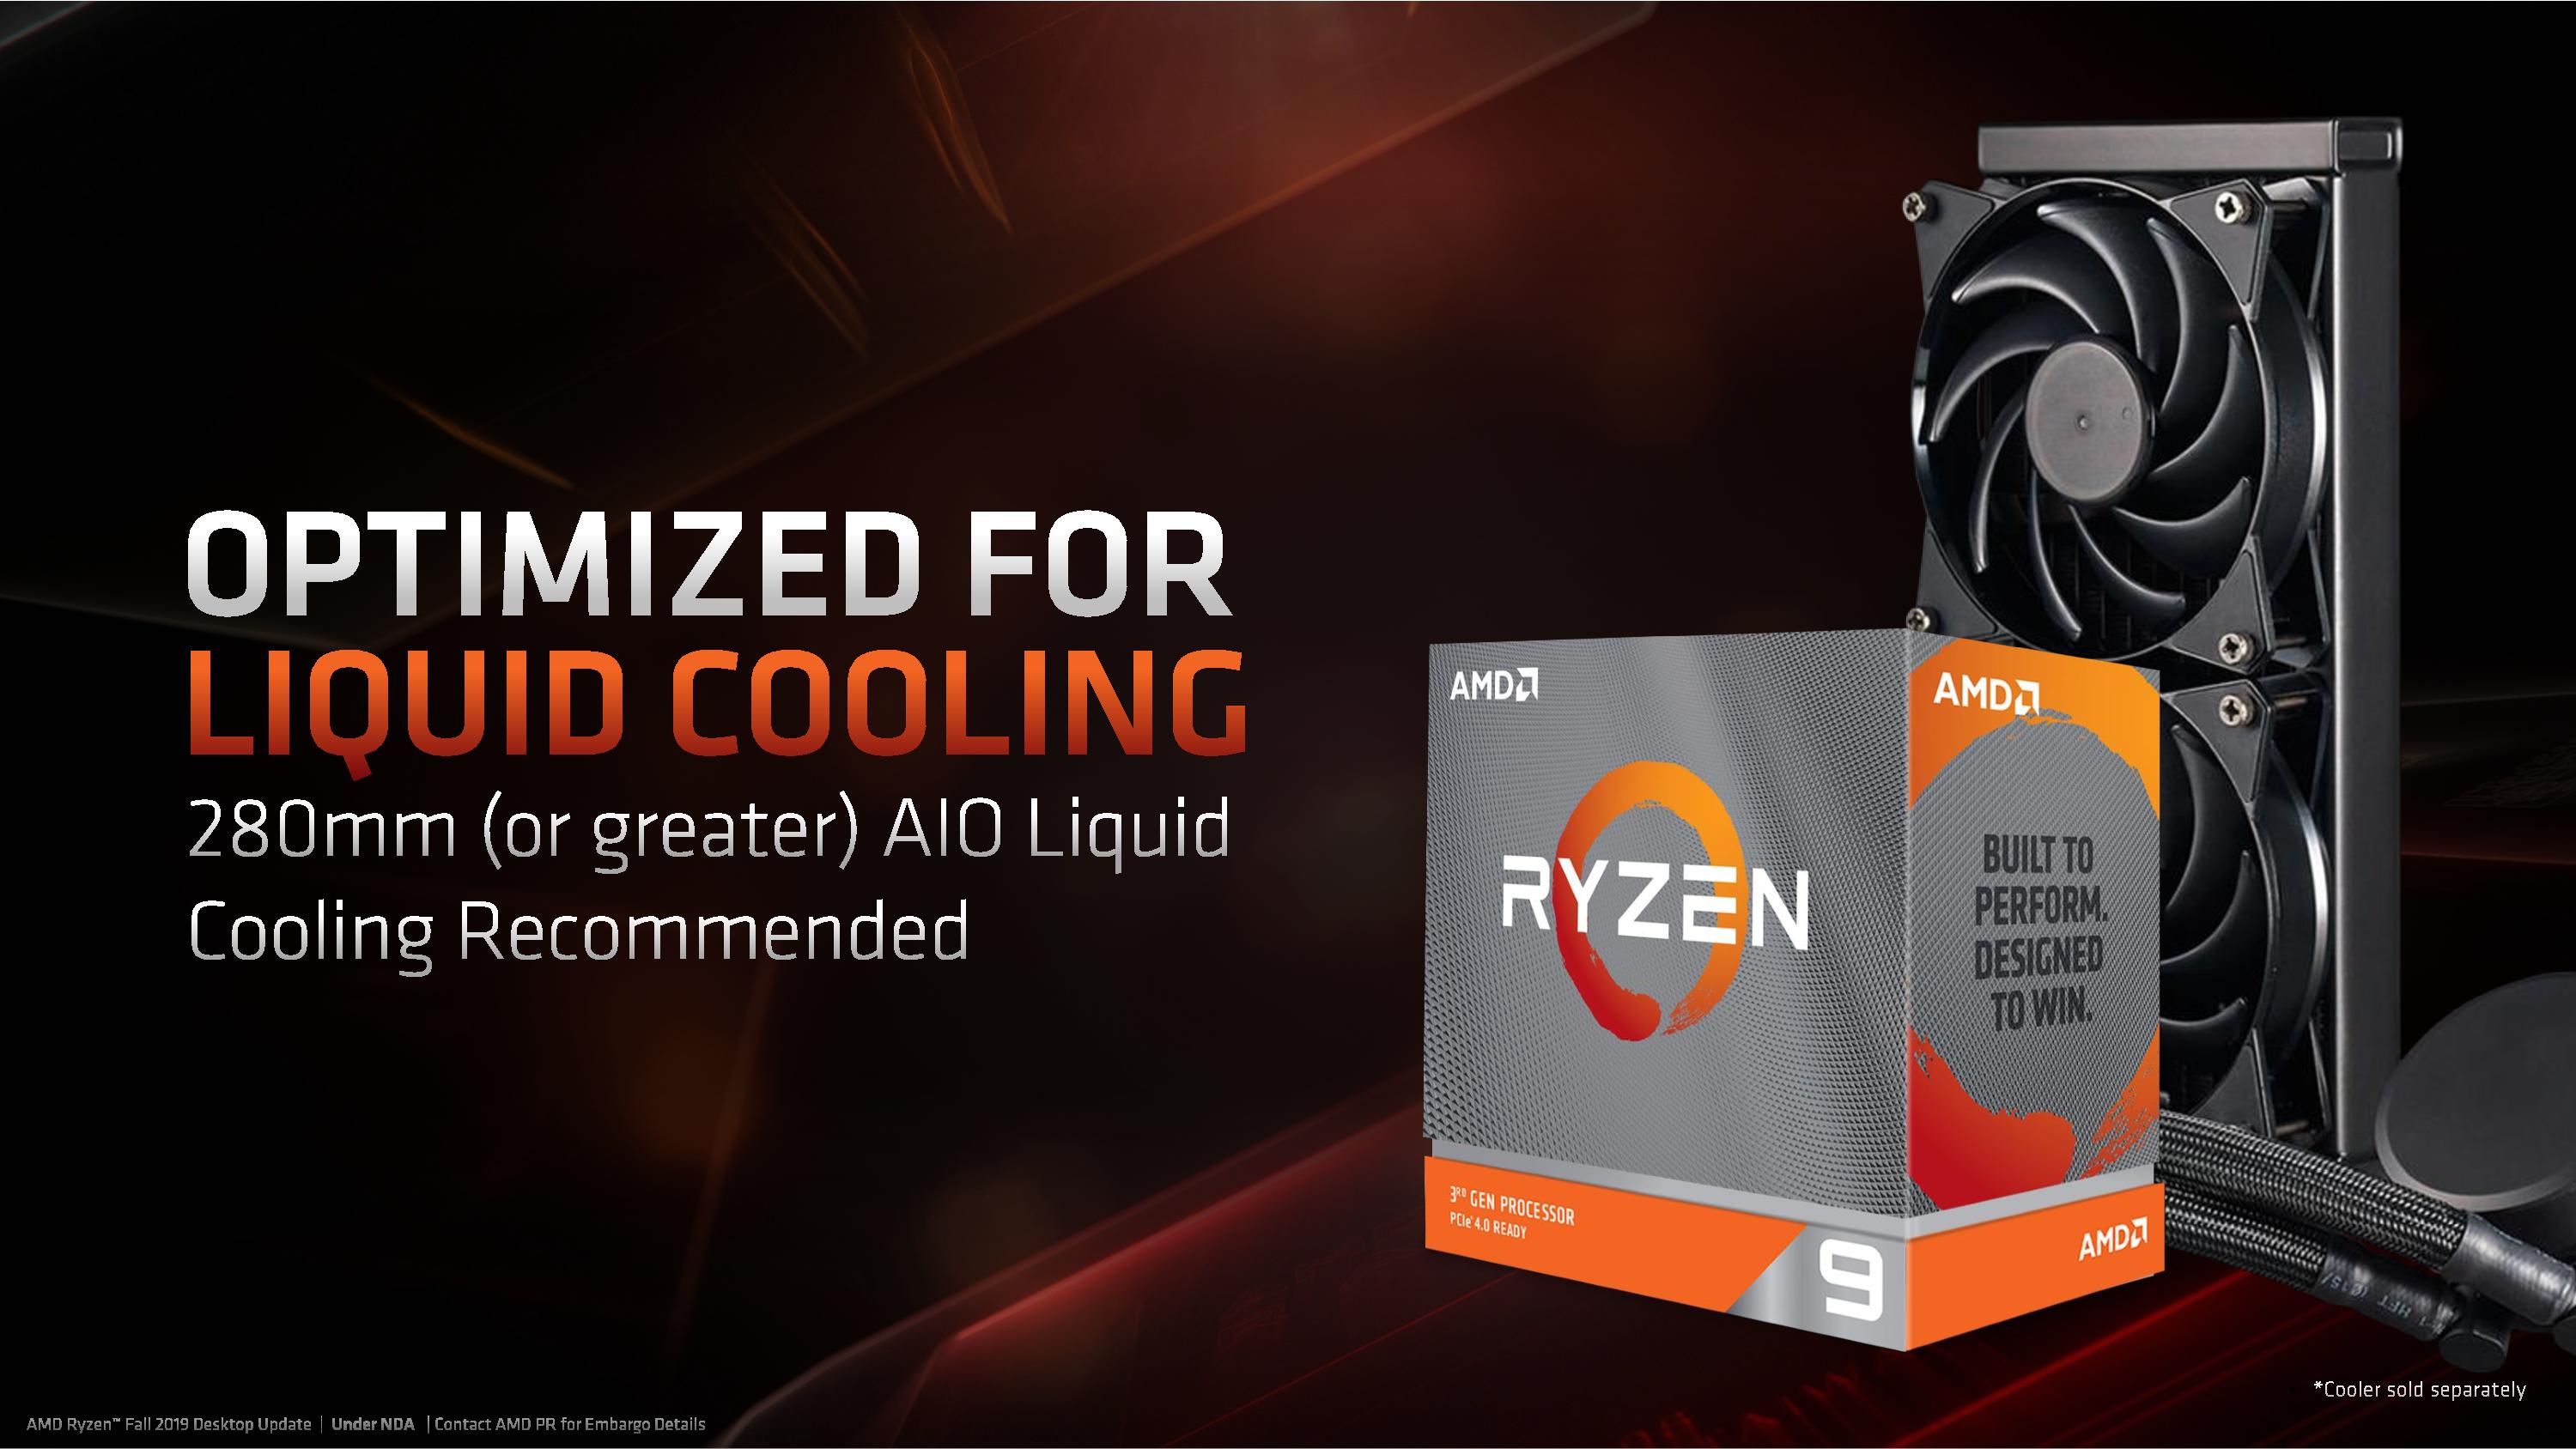 Optimized for Liquid Cooling